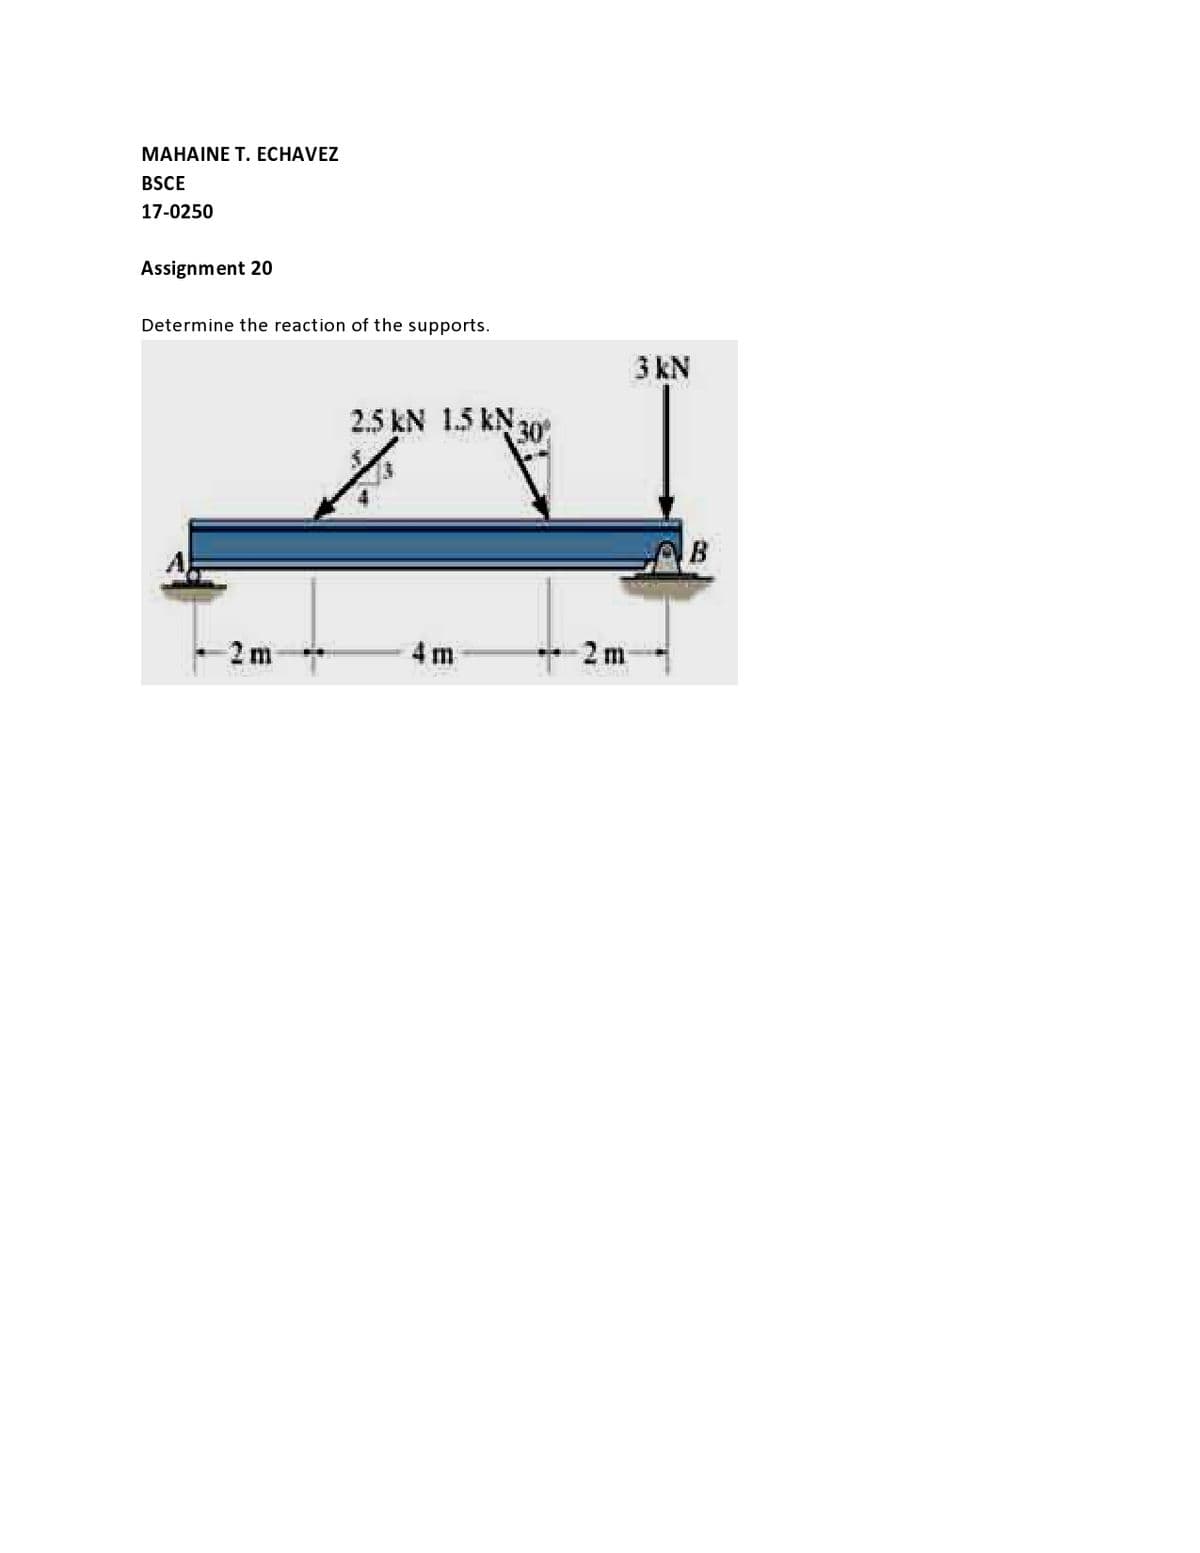 MAHAINE T. ECHAVEZ
BSCE
17-0250
Assignment 20
Determine the reaction of the supports.
3 kN
2.5 kN 1.5 kN a0
B
2 m
4 m
* 2m
